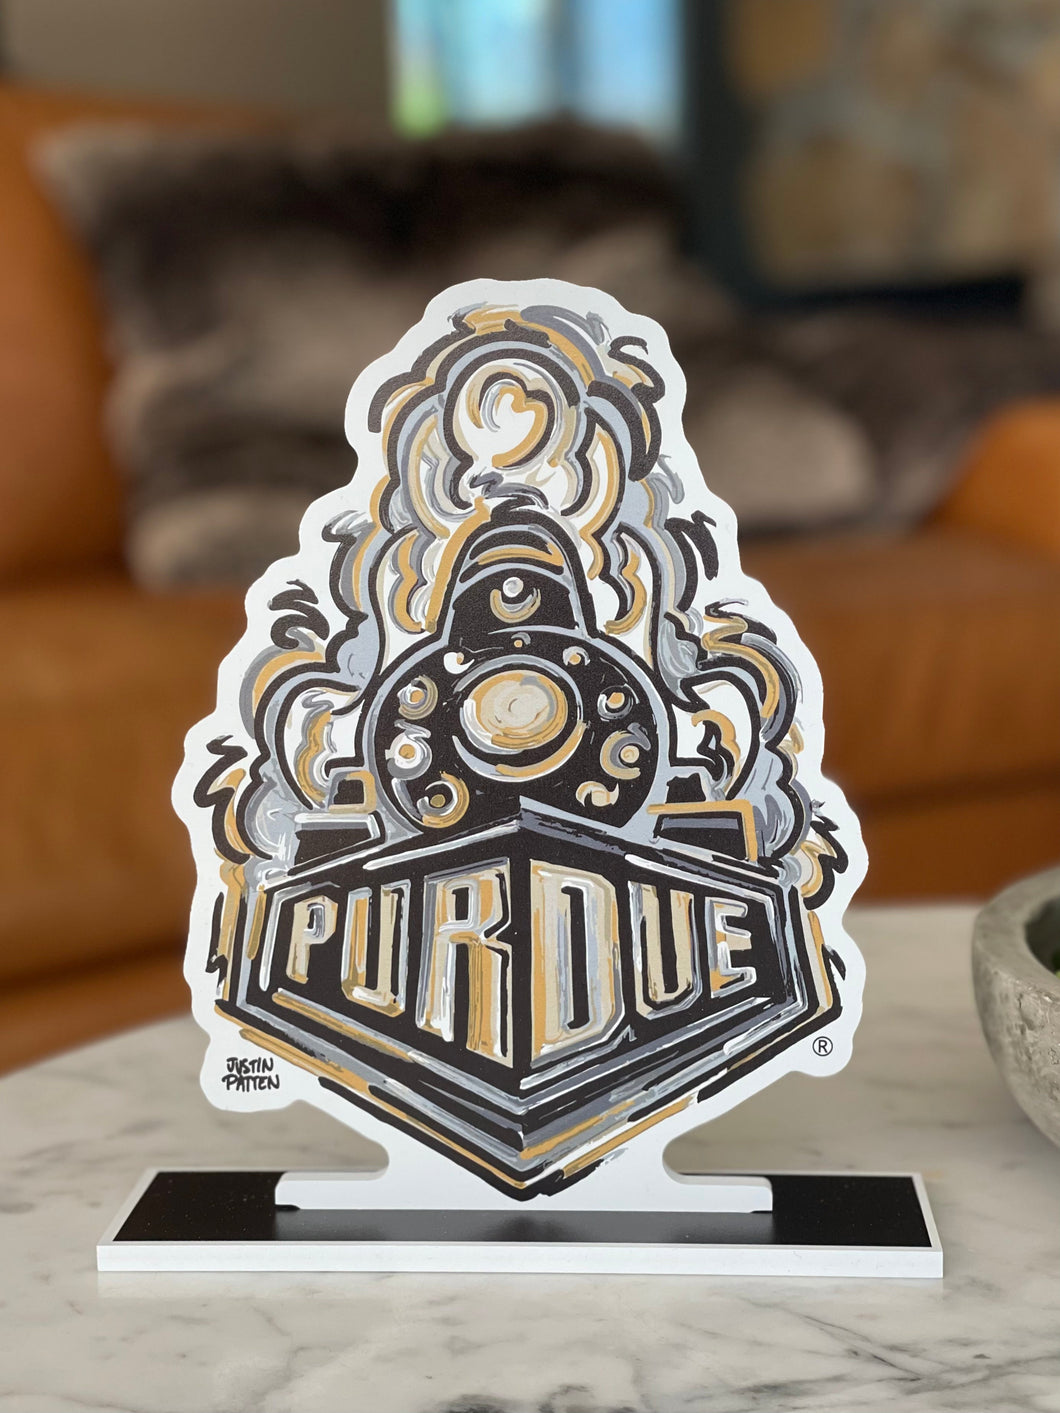 Purdue Boilermaker Special Standee by Justin Patten